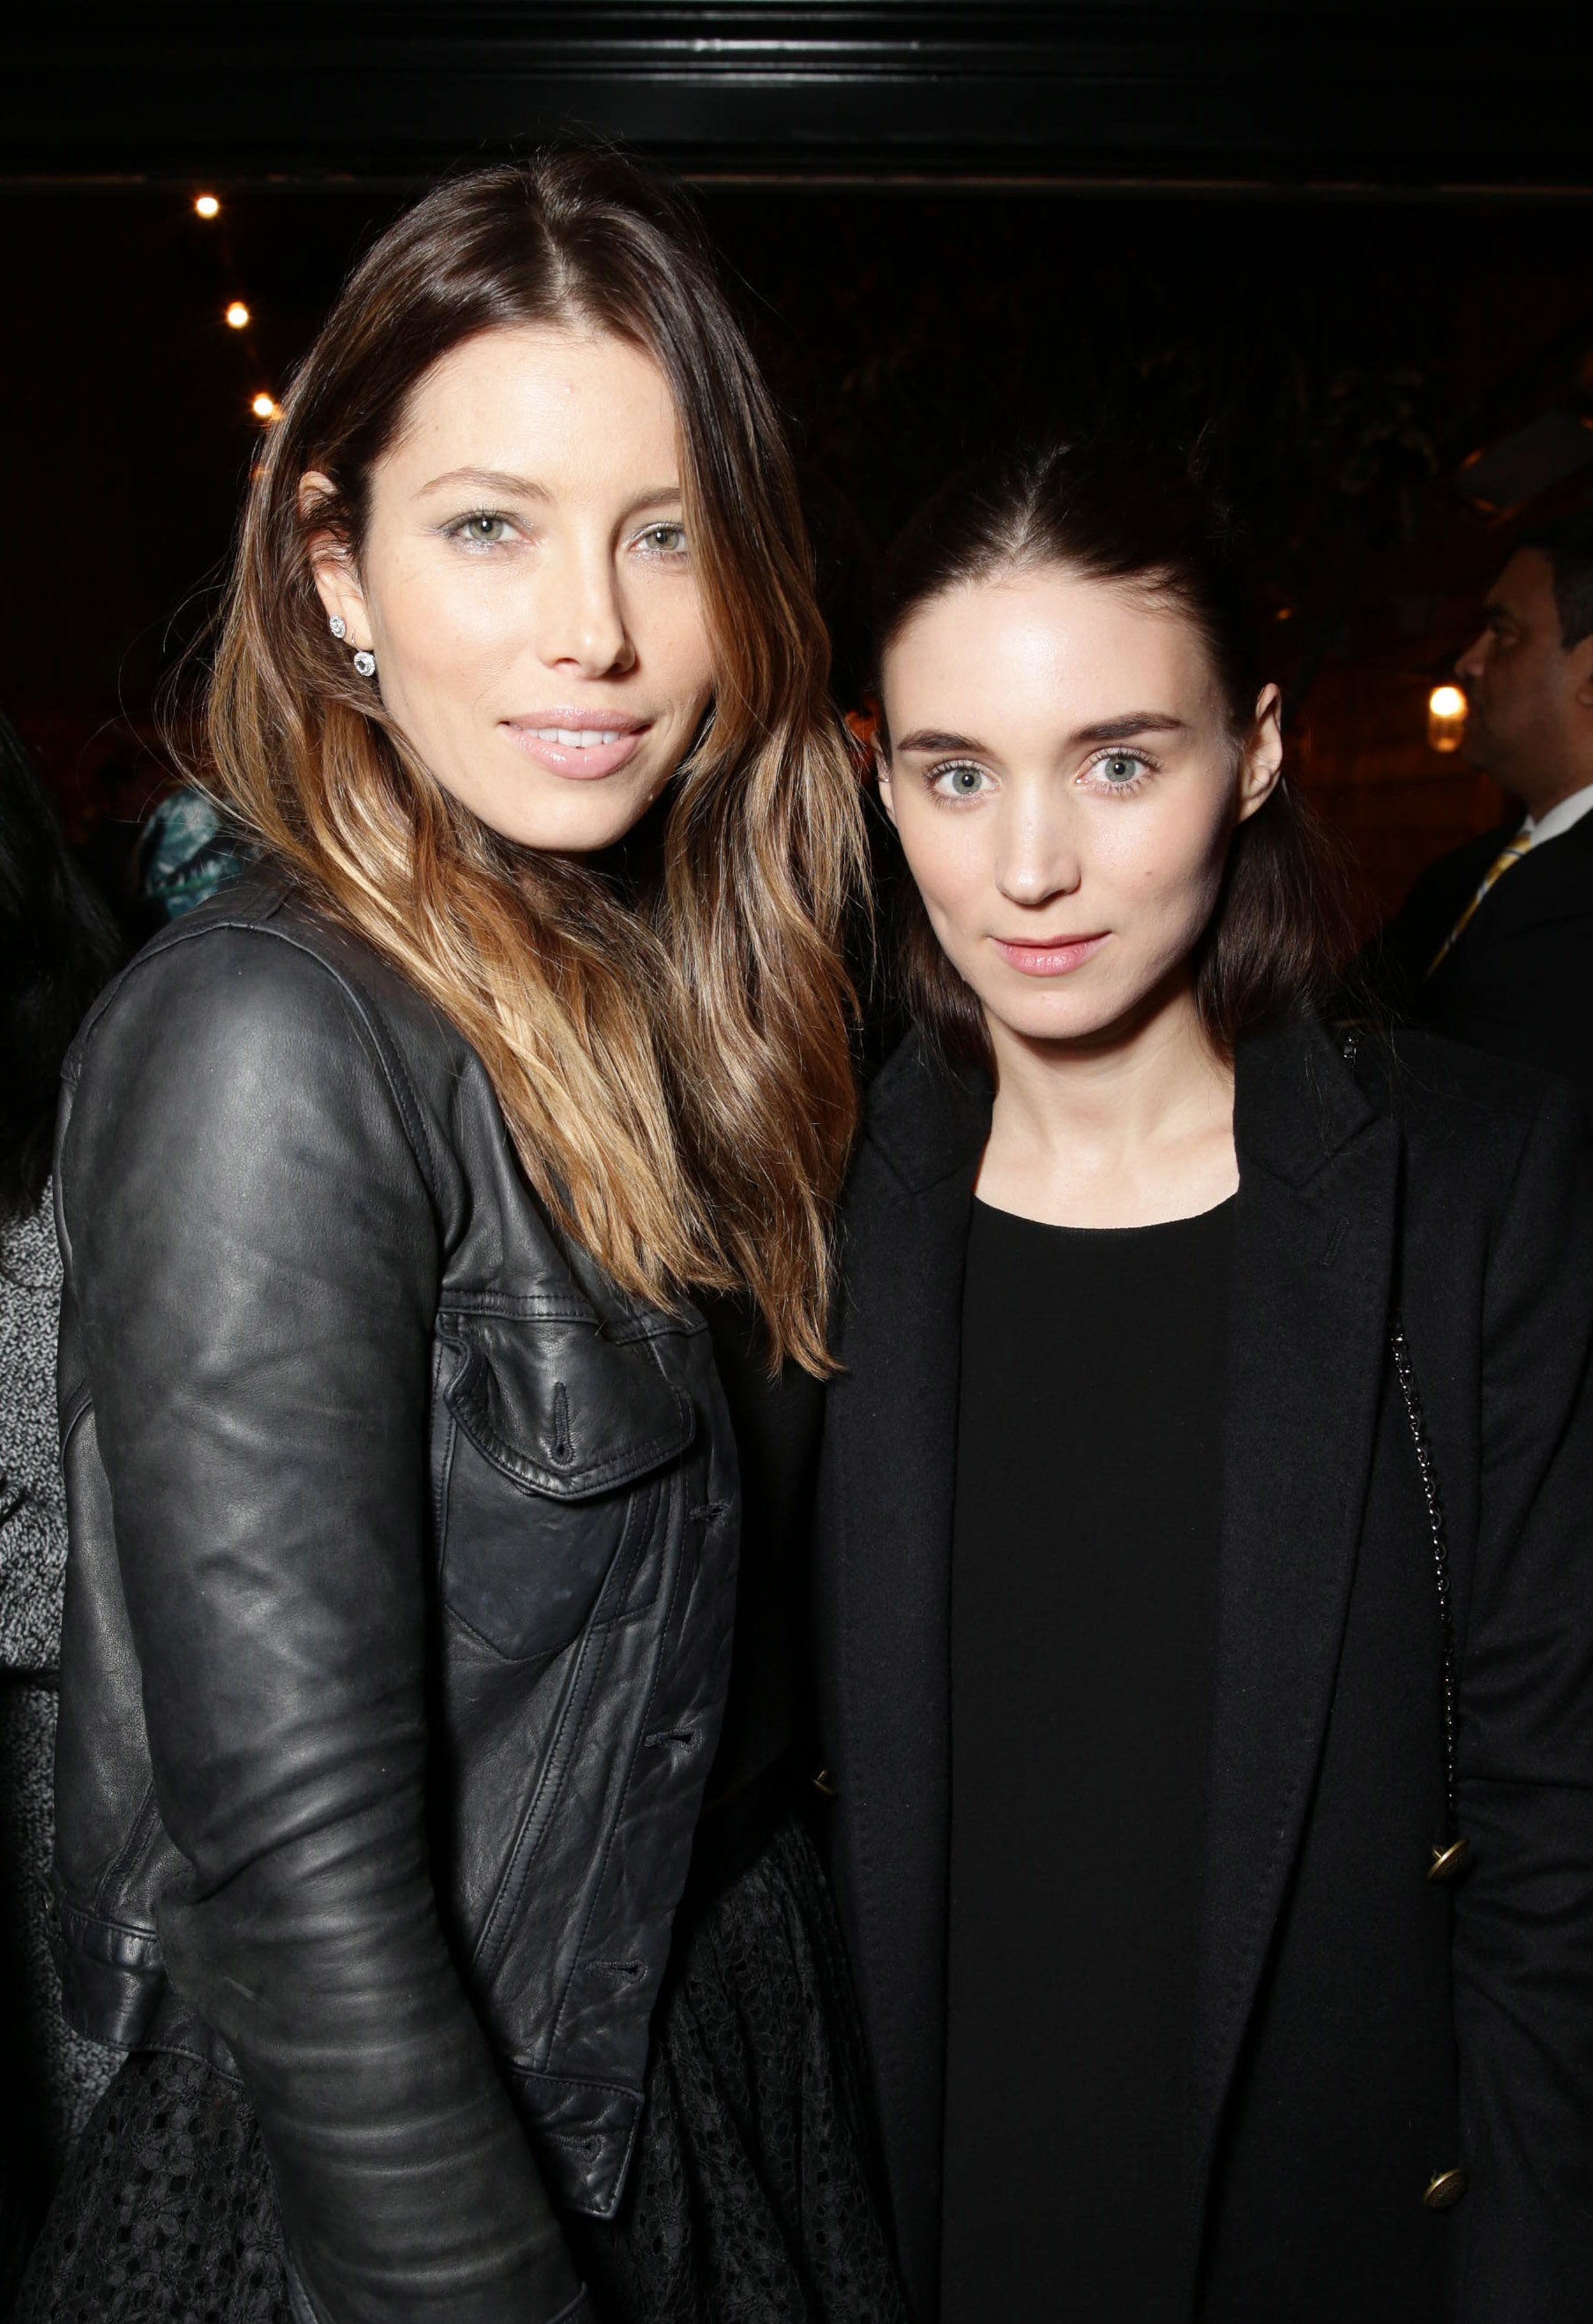 Jessica Biel at event of The Truth About Emanuel (2013)